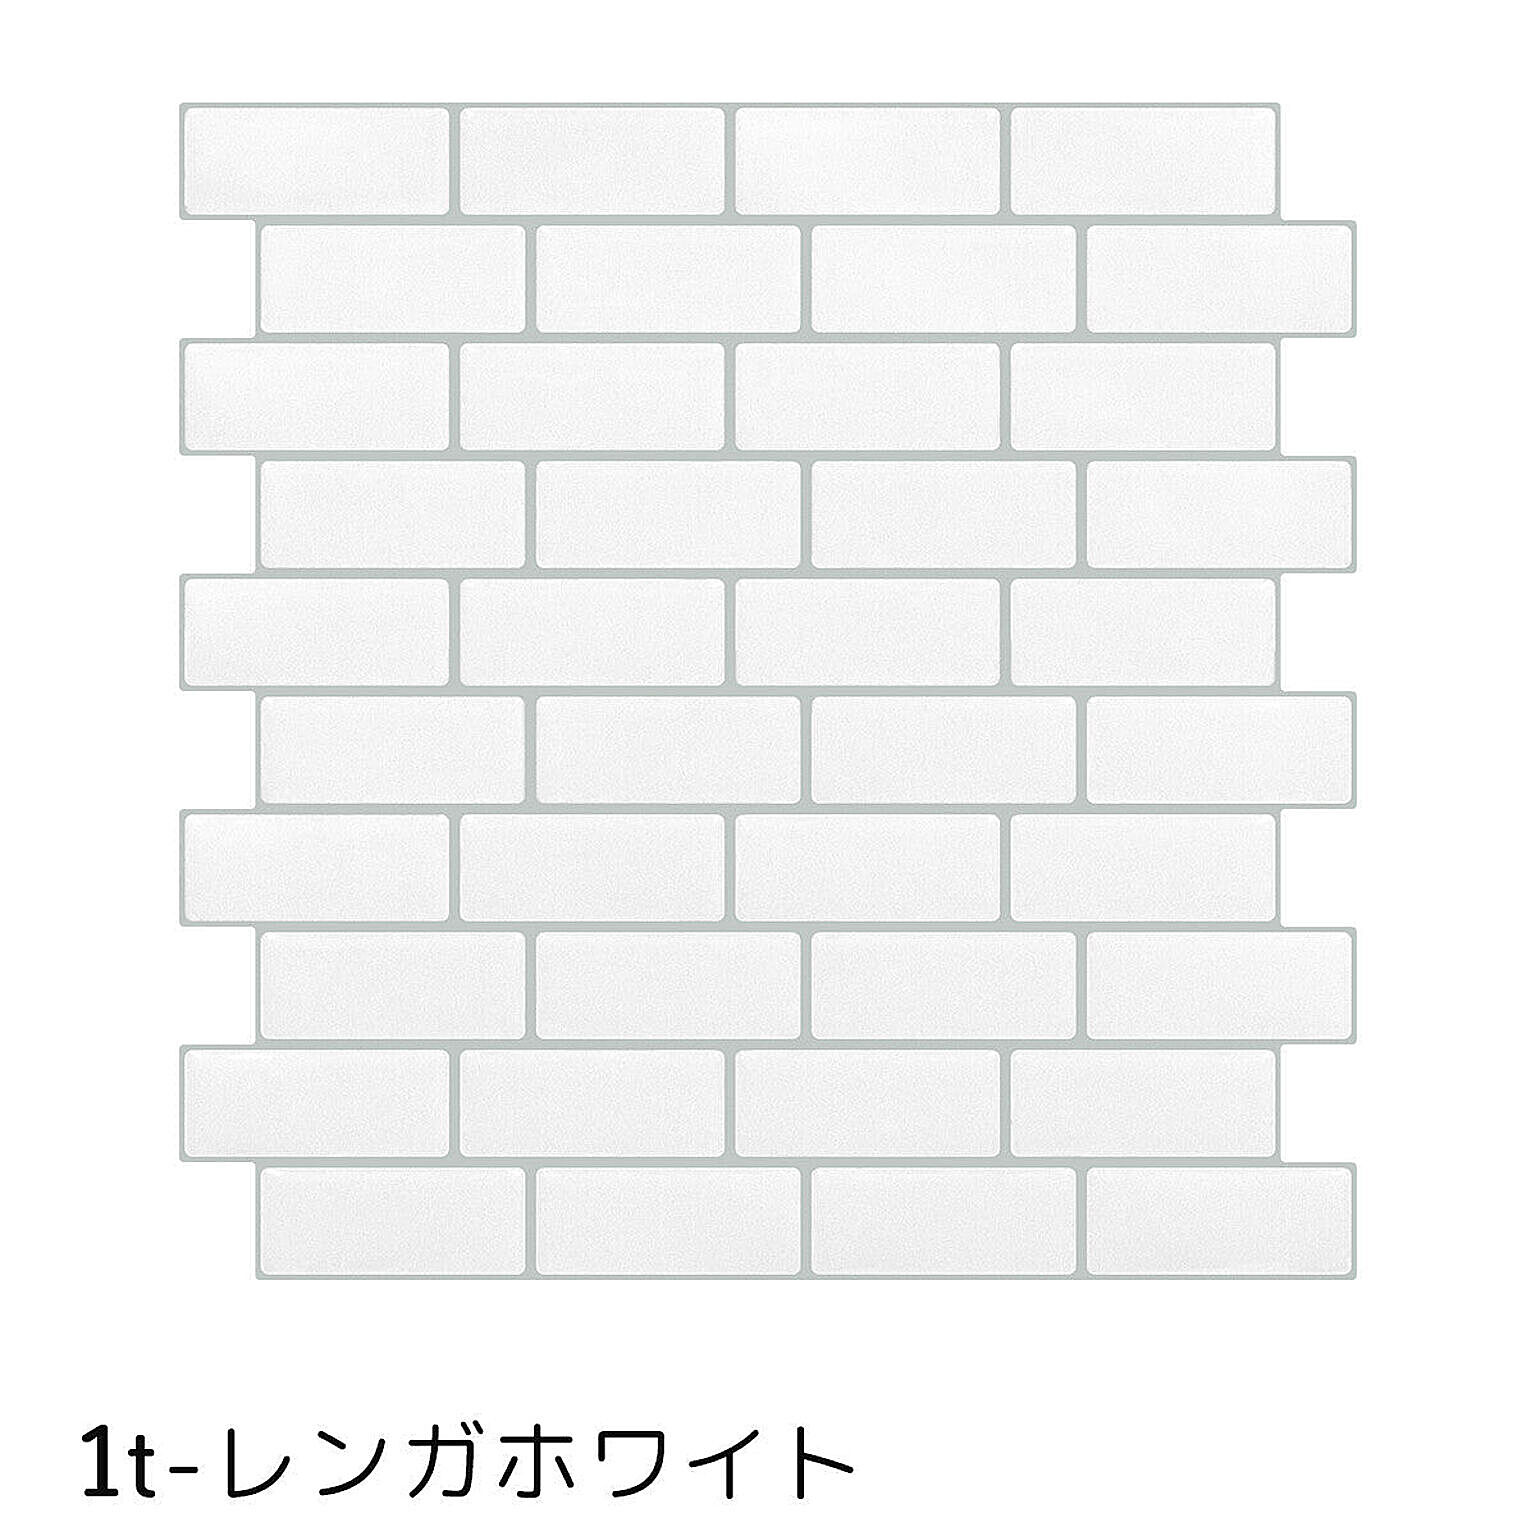 remecle / モザイクタイル tilewall